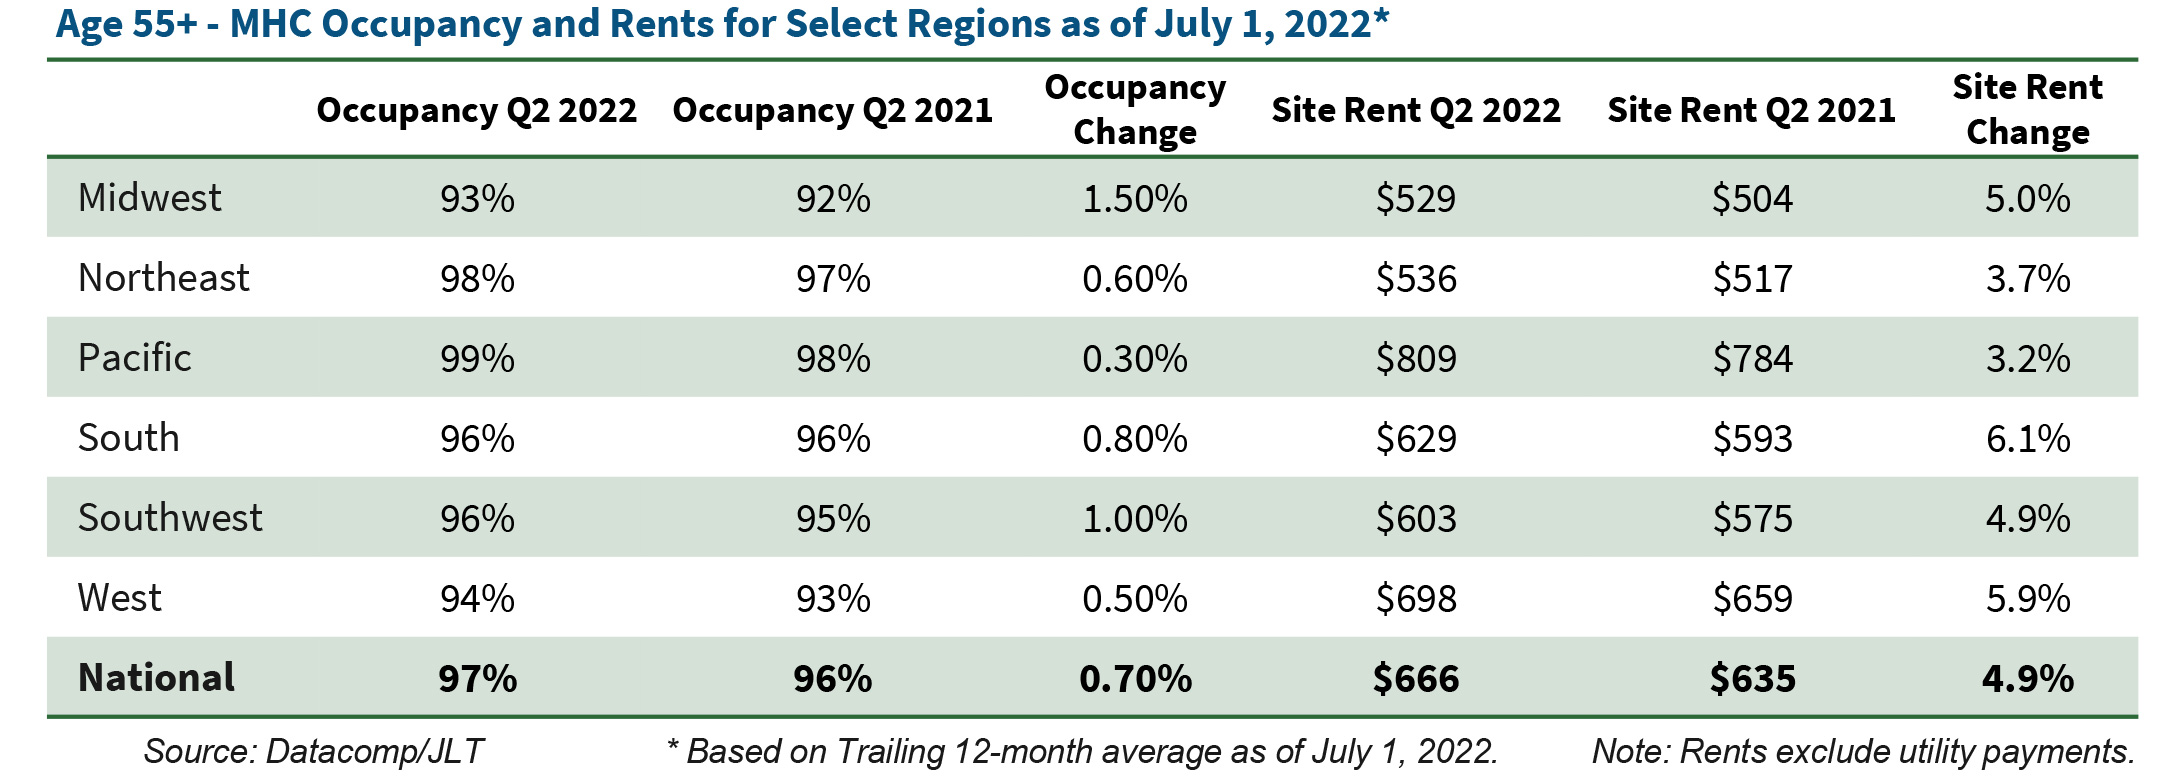 Age 55+ - MHC Occupancy and Rents for Select Regions as of July 1, 2022